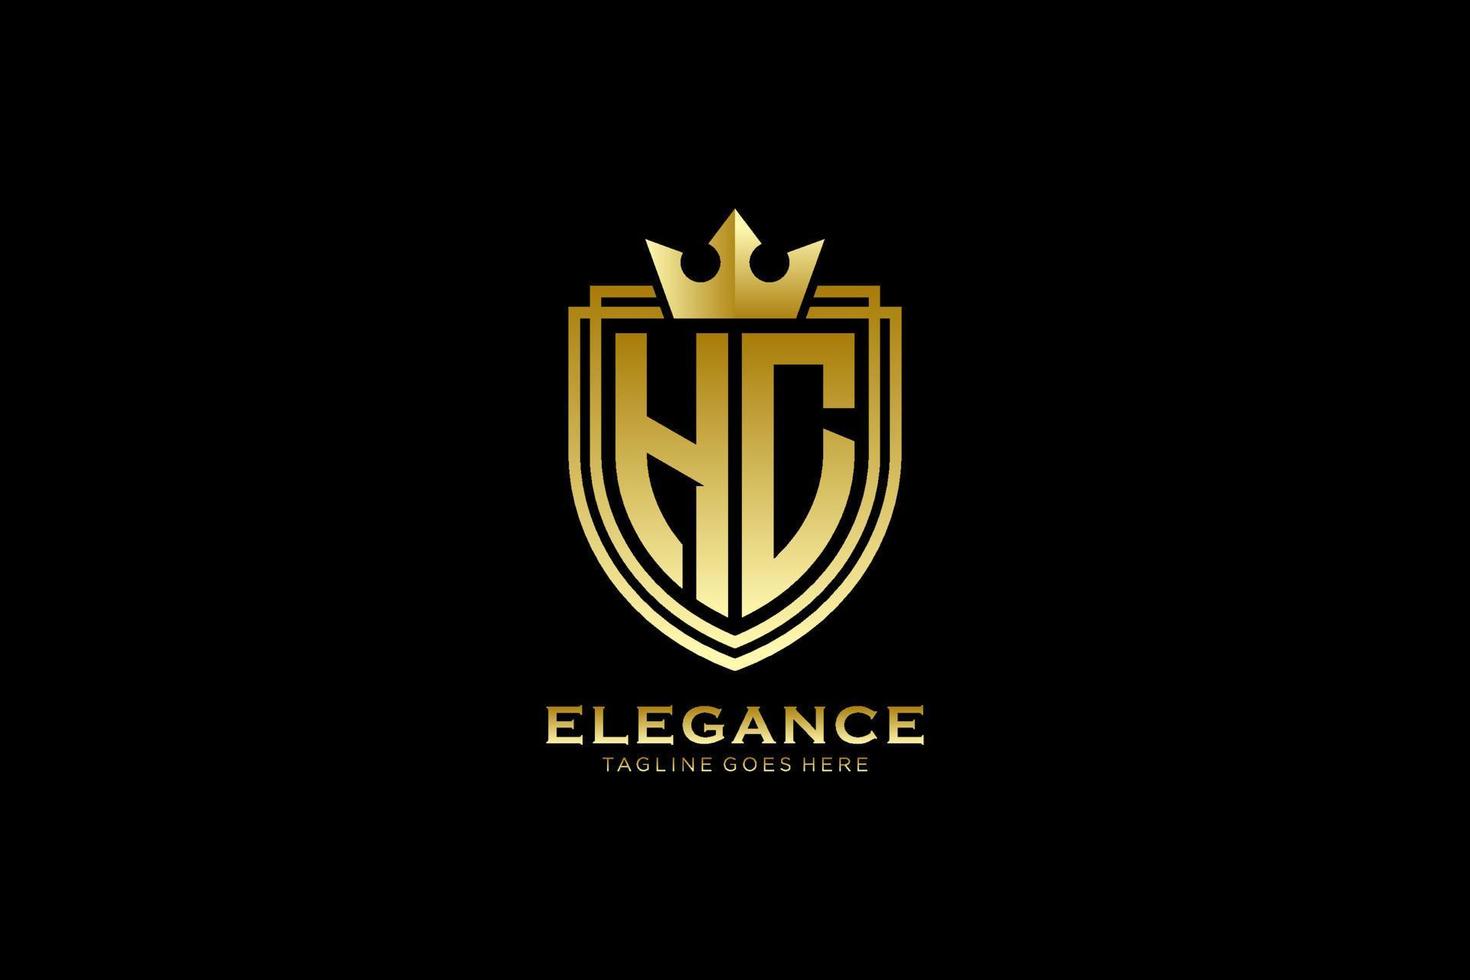 initial HC elegant luxury monogram logo or badge template with scrolls and royal crown - perfect for luxurious branding projects vector